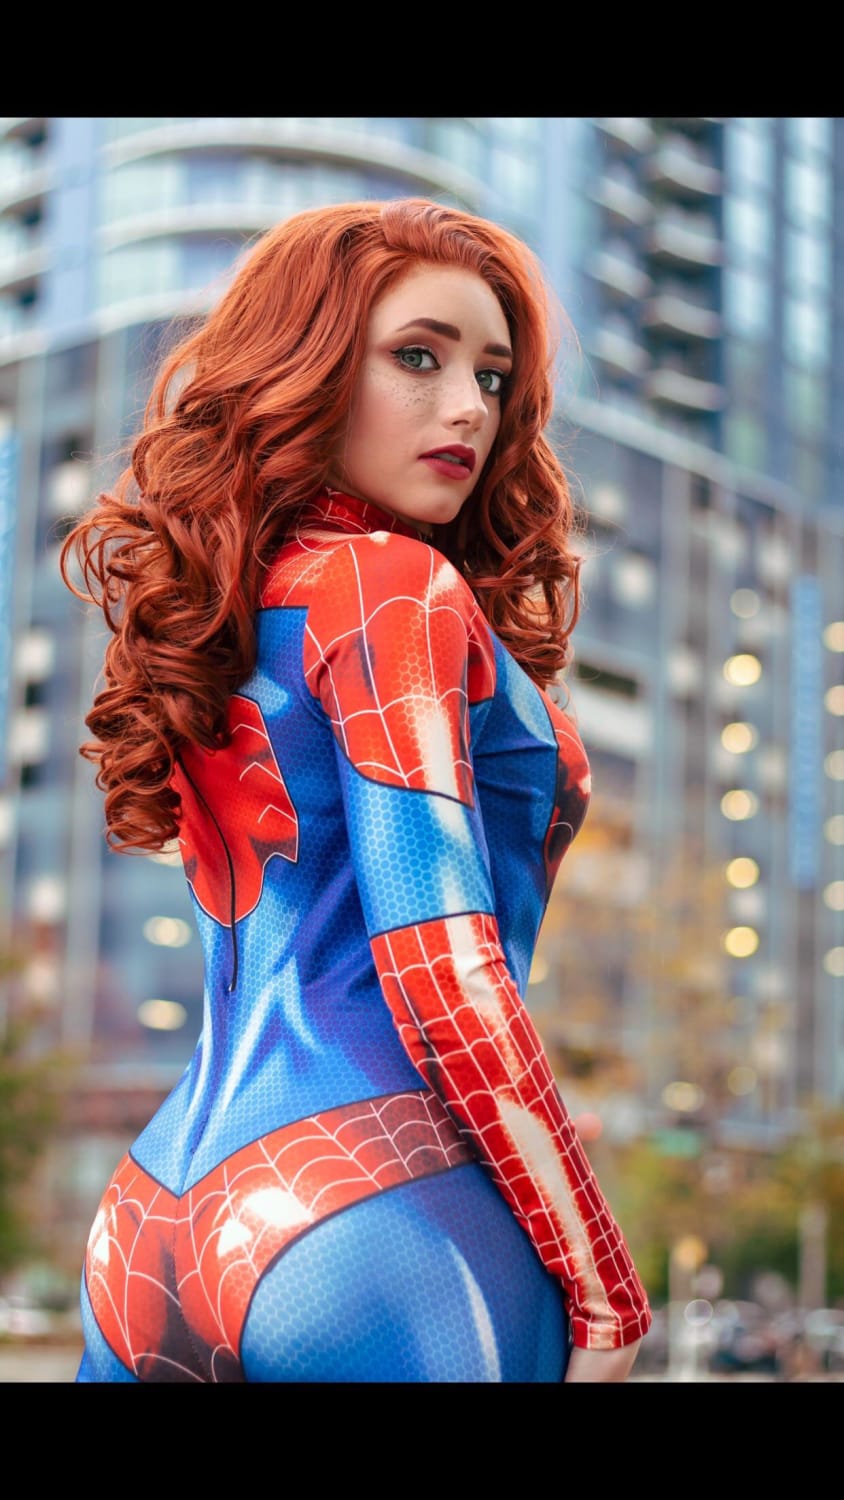 [SELF] My Mary Jane as Spider-Man cosplay! 🕷🕸